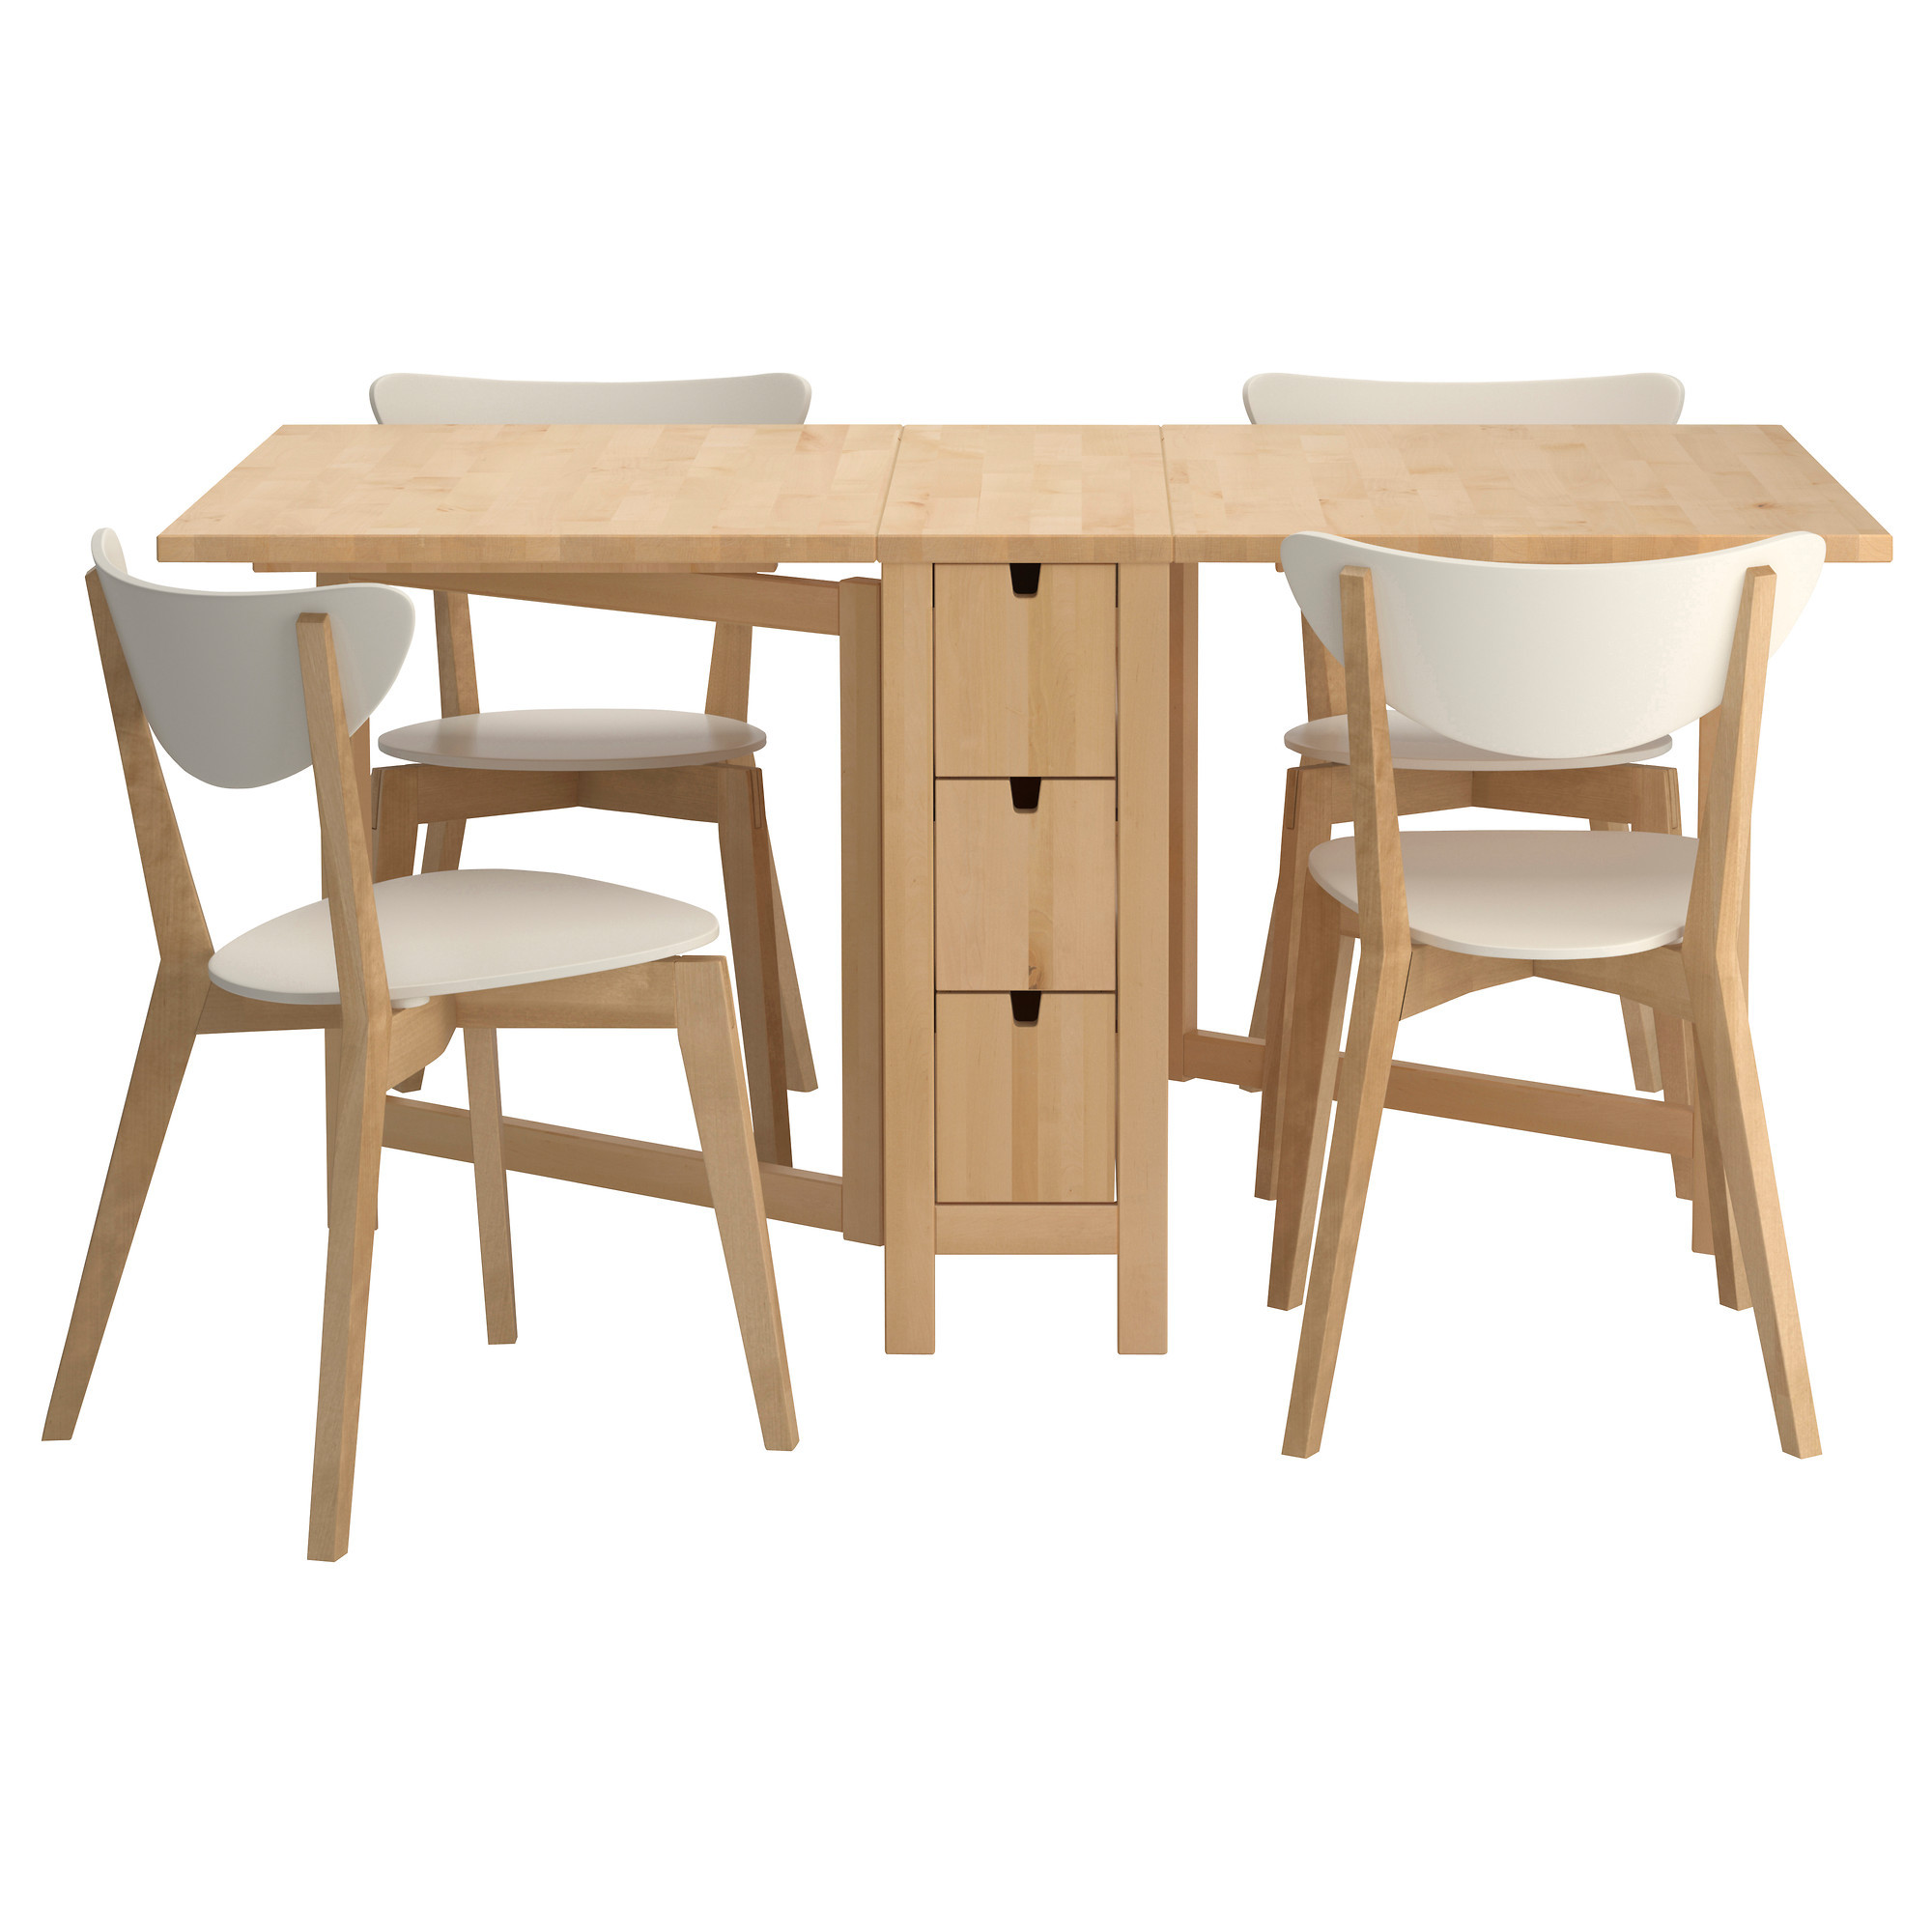 Small Folding Kitchen Table
 High Top Tables Ikea